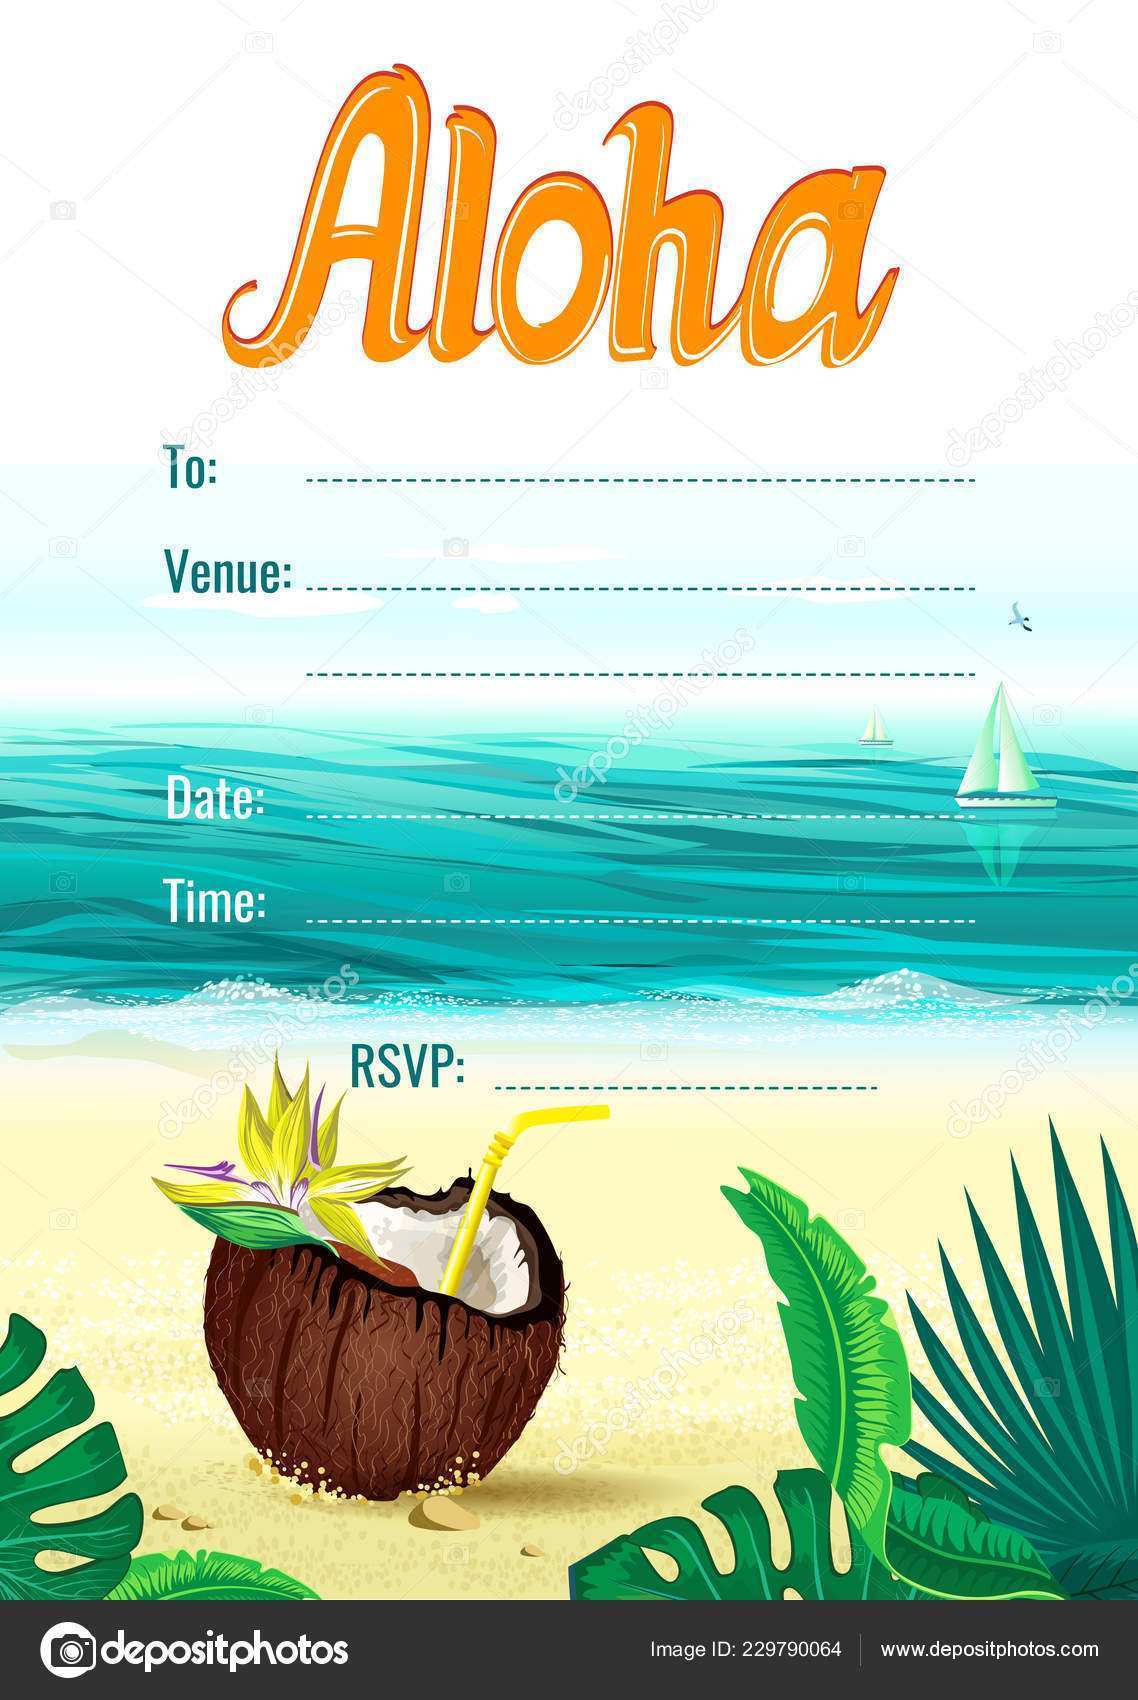 35 Customize Our Free Hawaii Id Card Template in Word with Hawaii Id Card Template